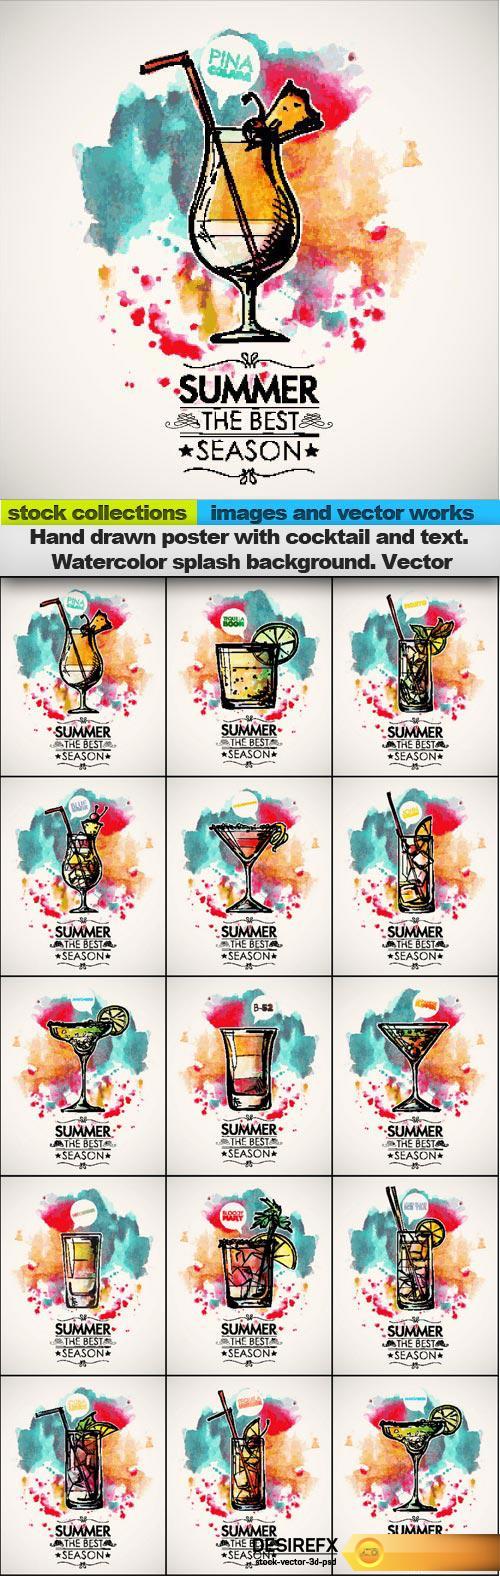 Hand drawn poster with cocktail and text. Watercolor splash background. Vector, 15 x EPS